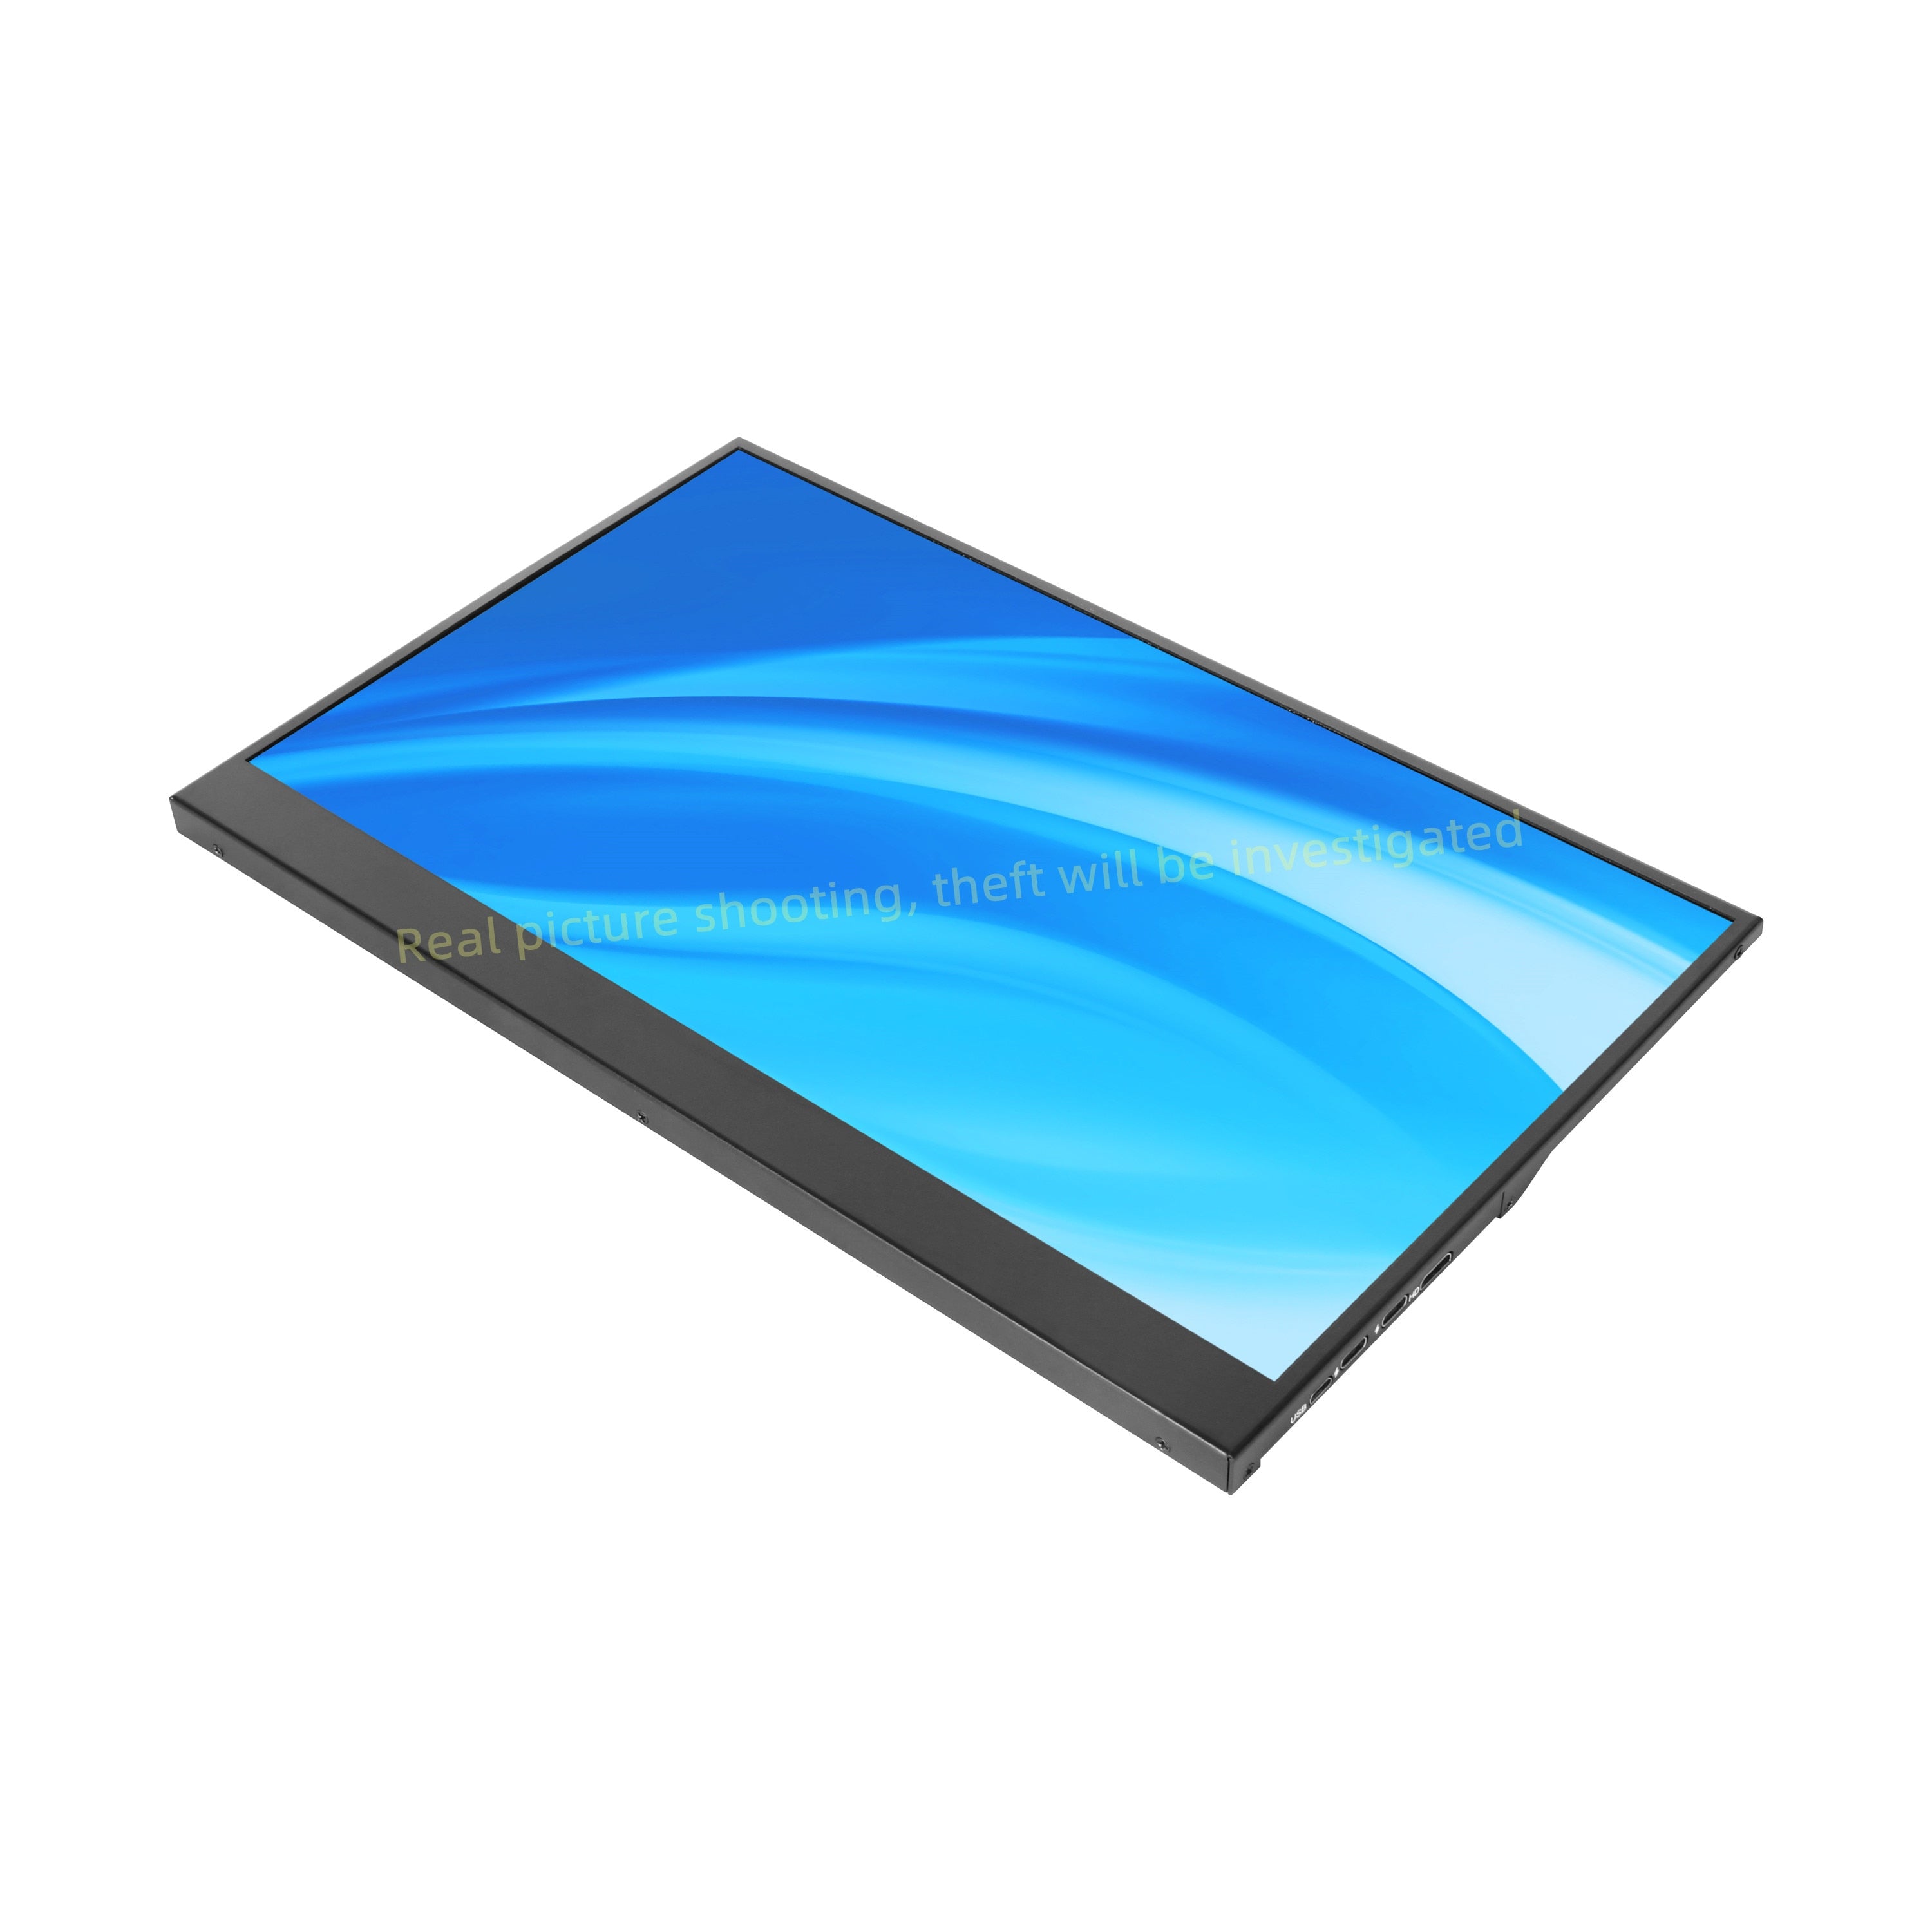 13.3 15.6" 4K USB Type C IPS Screen Portable Monitor For Ps4 PS5 Switch Xbox Huawei Xiaomi Phone Gaming Laptop LCD Display